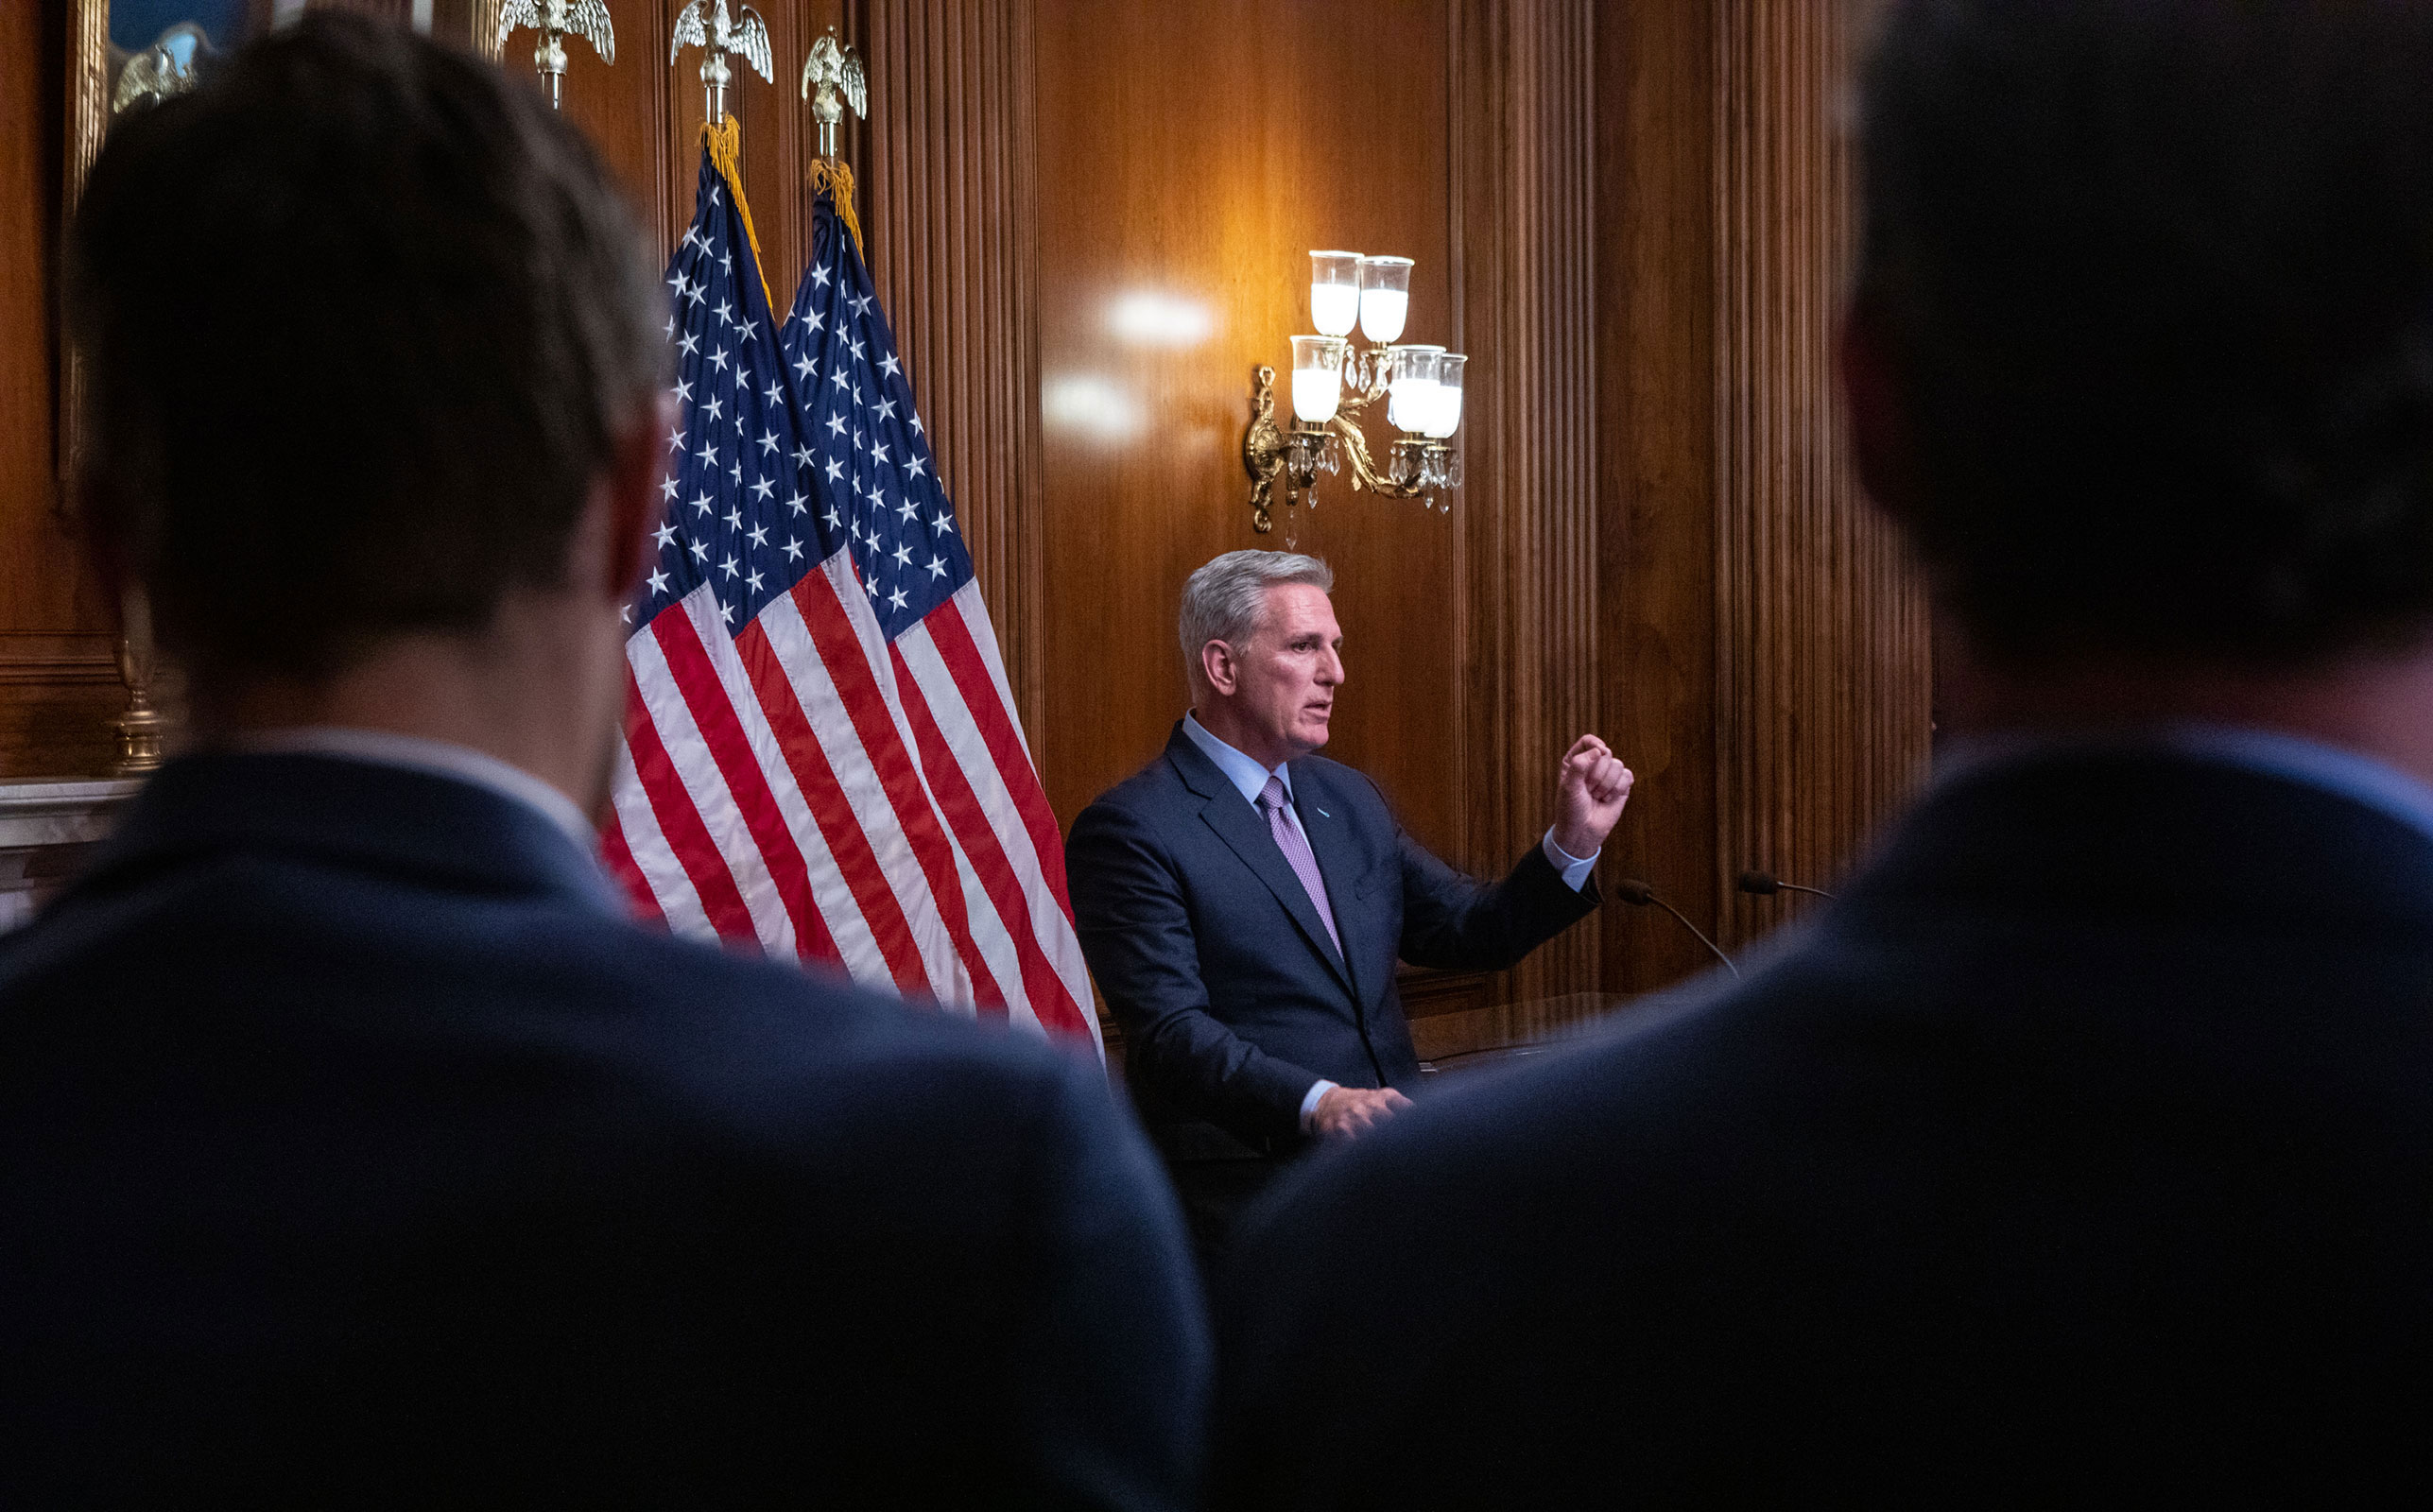 Former Speaker Kevin McCarthy speaks to the press after the motion to vacate his position passes in the US Capitol on October 3 in Washington, DC.